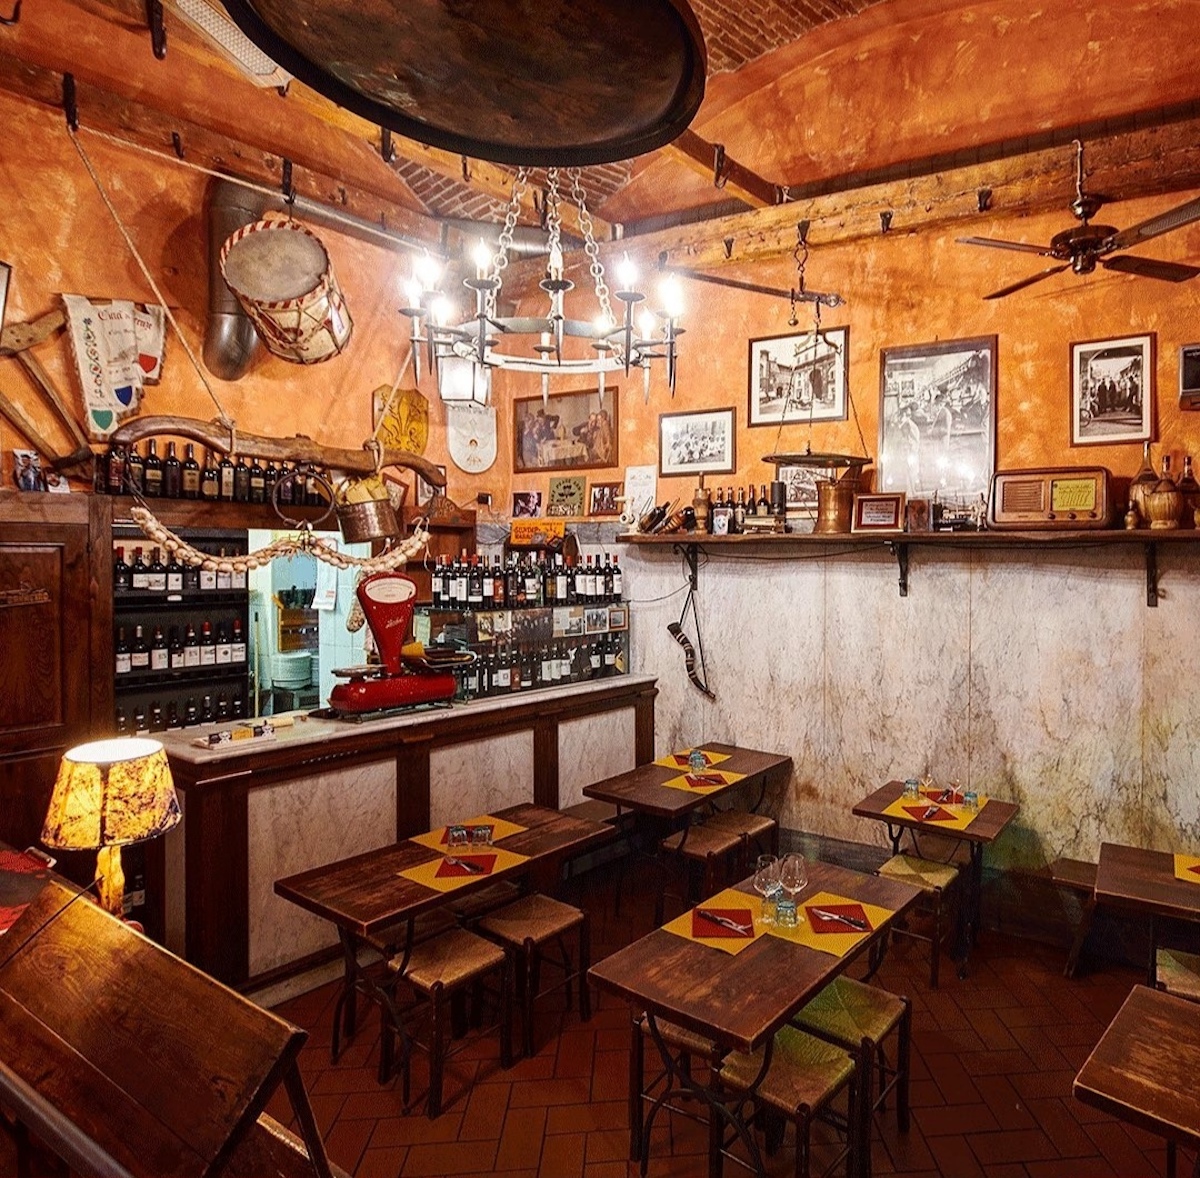 Interior of a rustic Tuscan restaurant with dark wood paneling